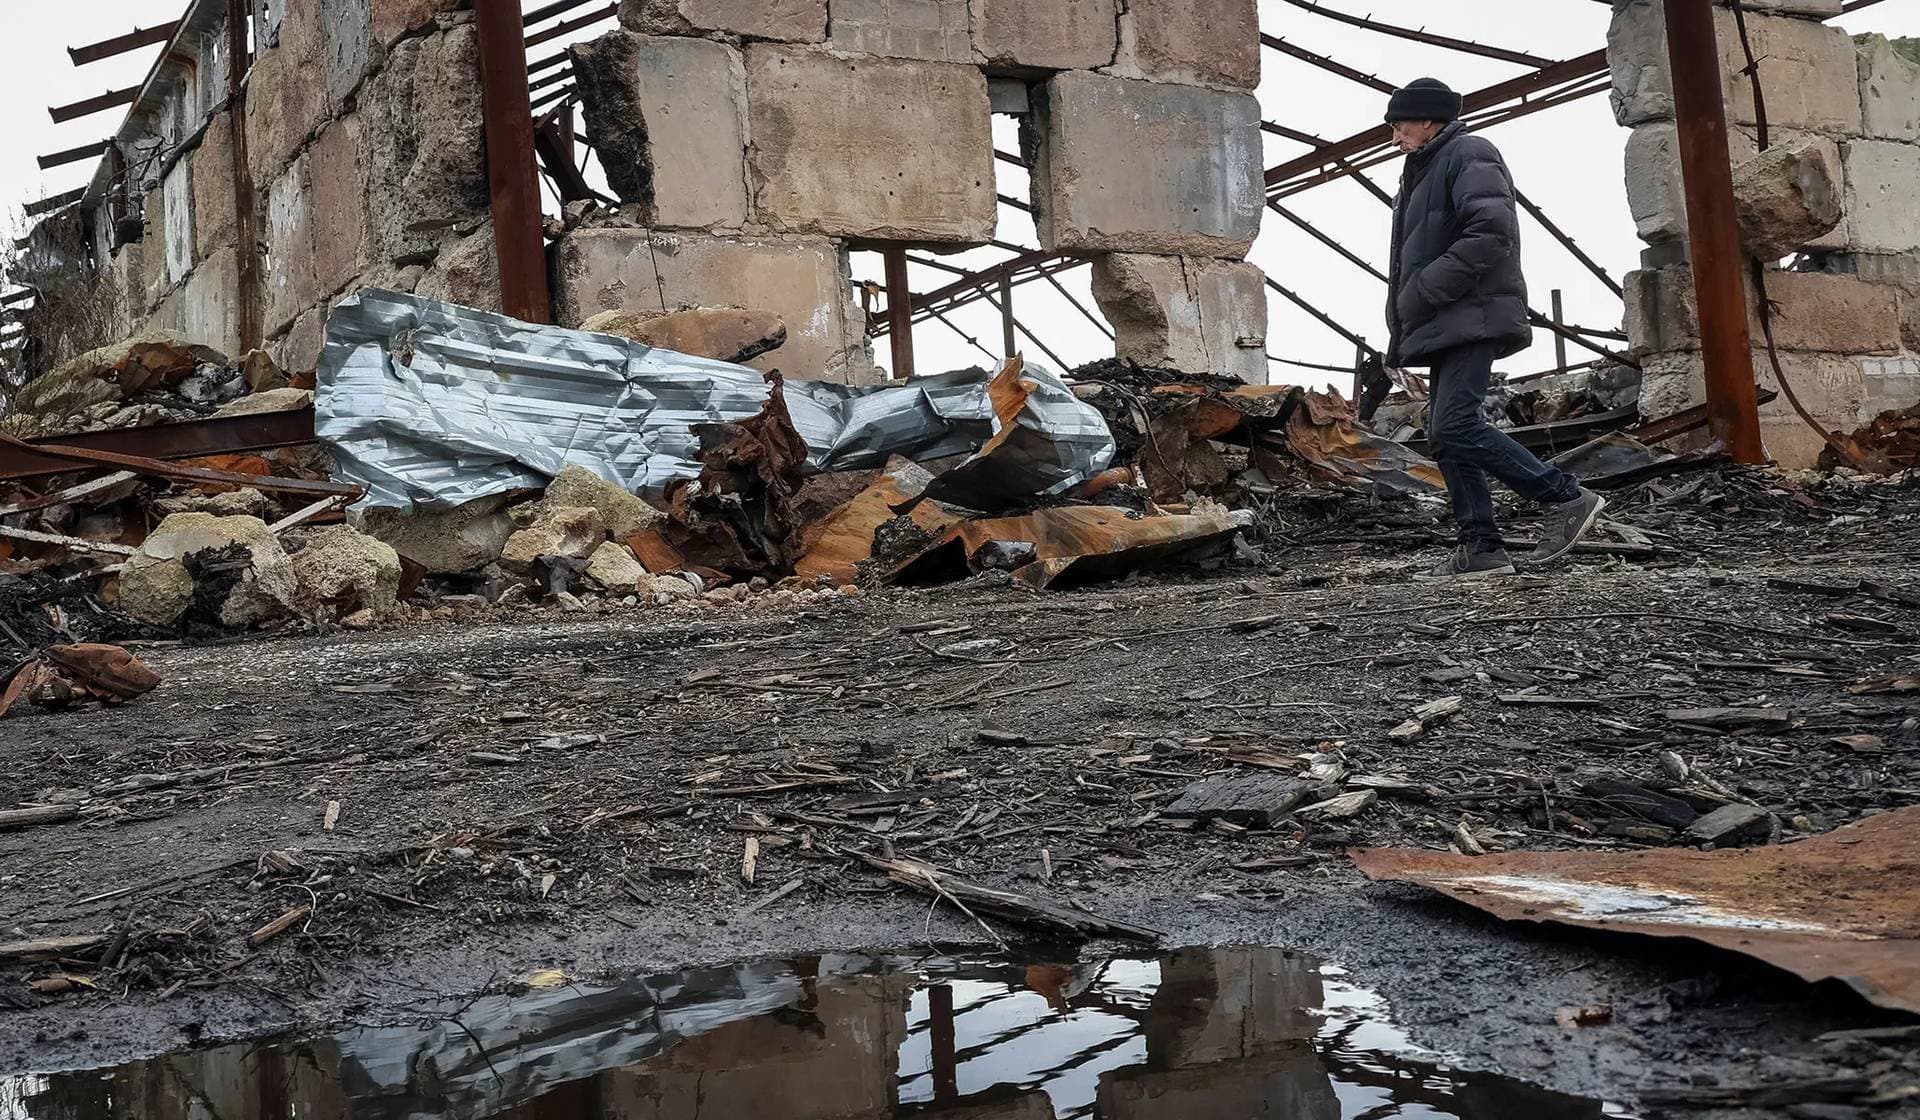 A local resident walks amidst the debris at a site of a farm that was destroyed last year by Russian military strike in the village of Kamianka